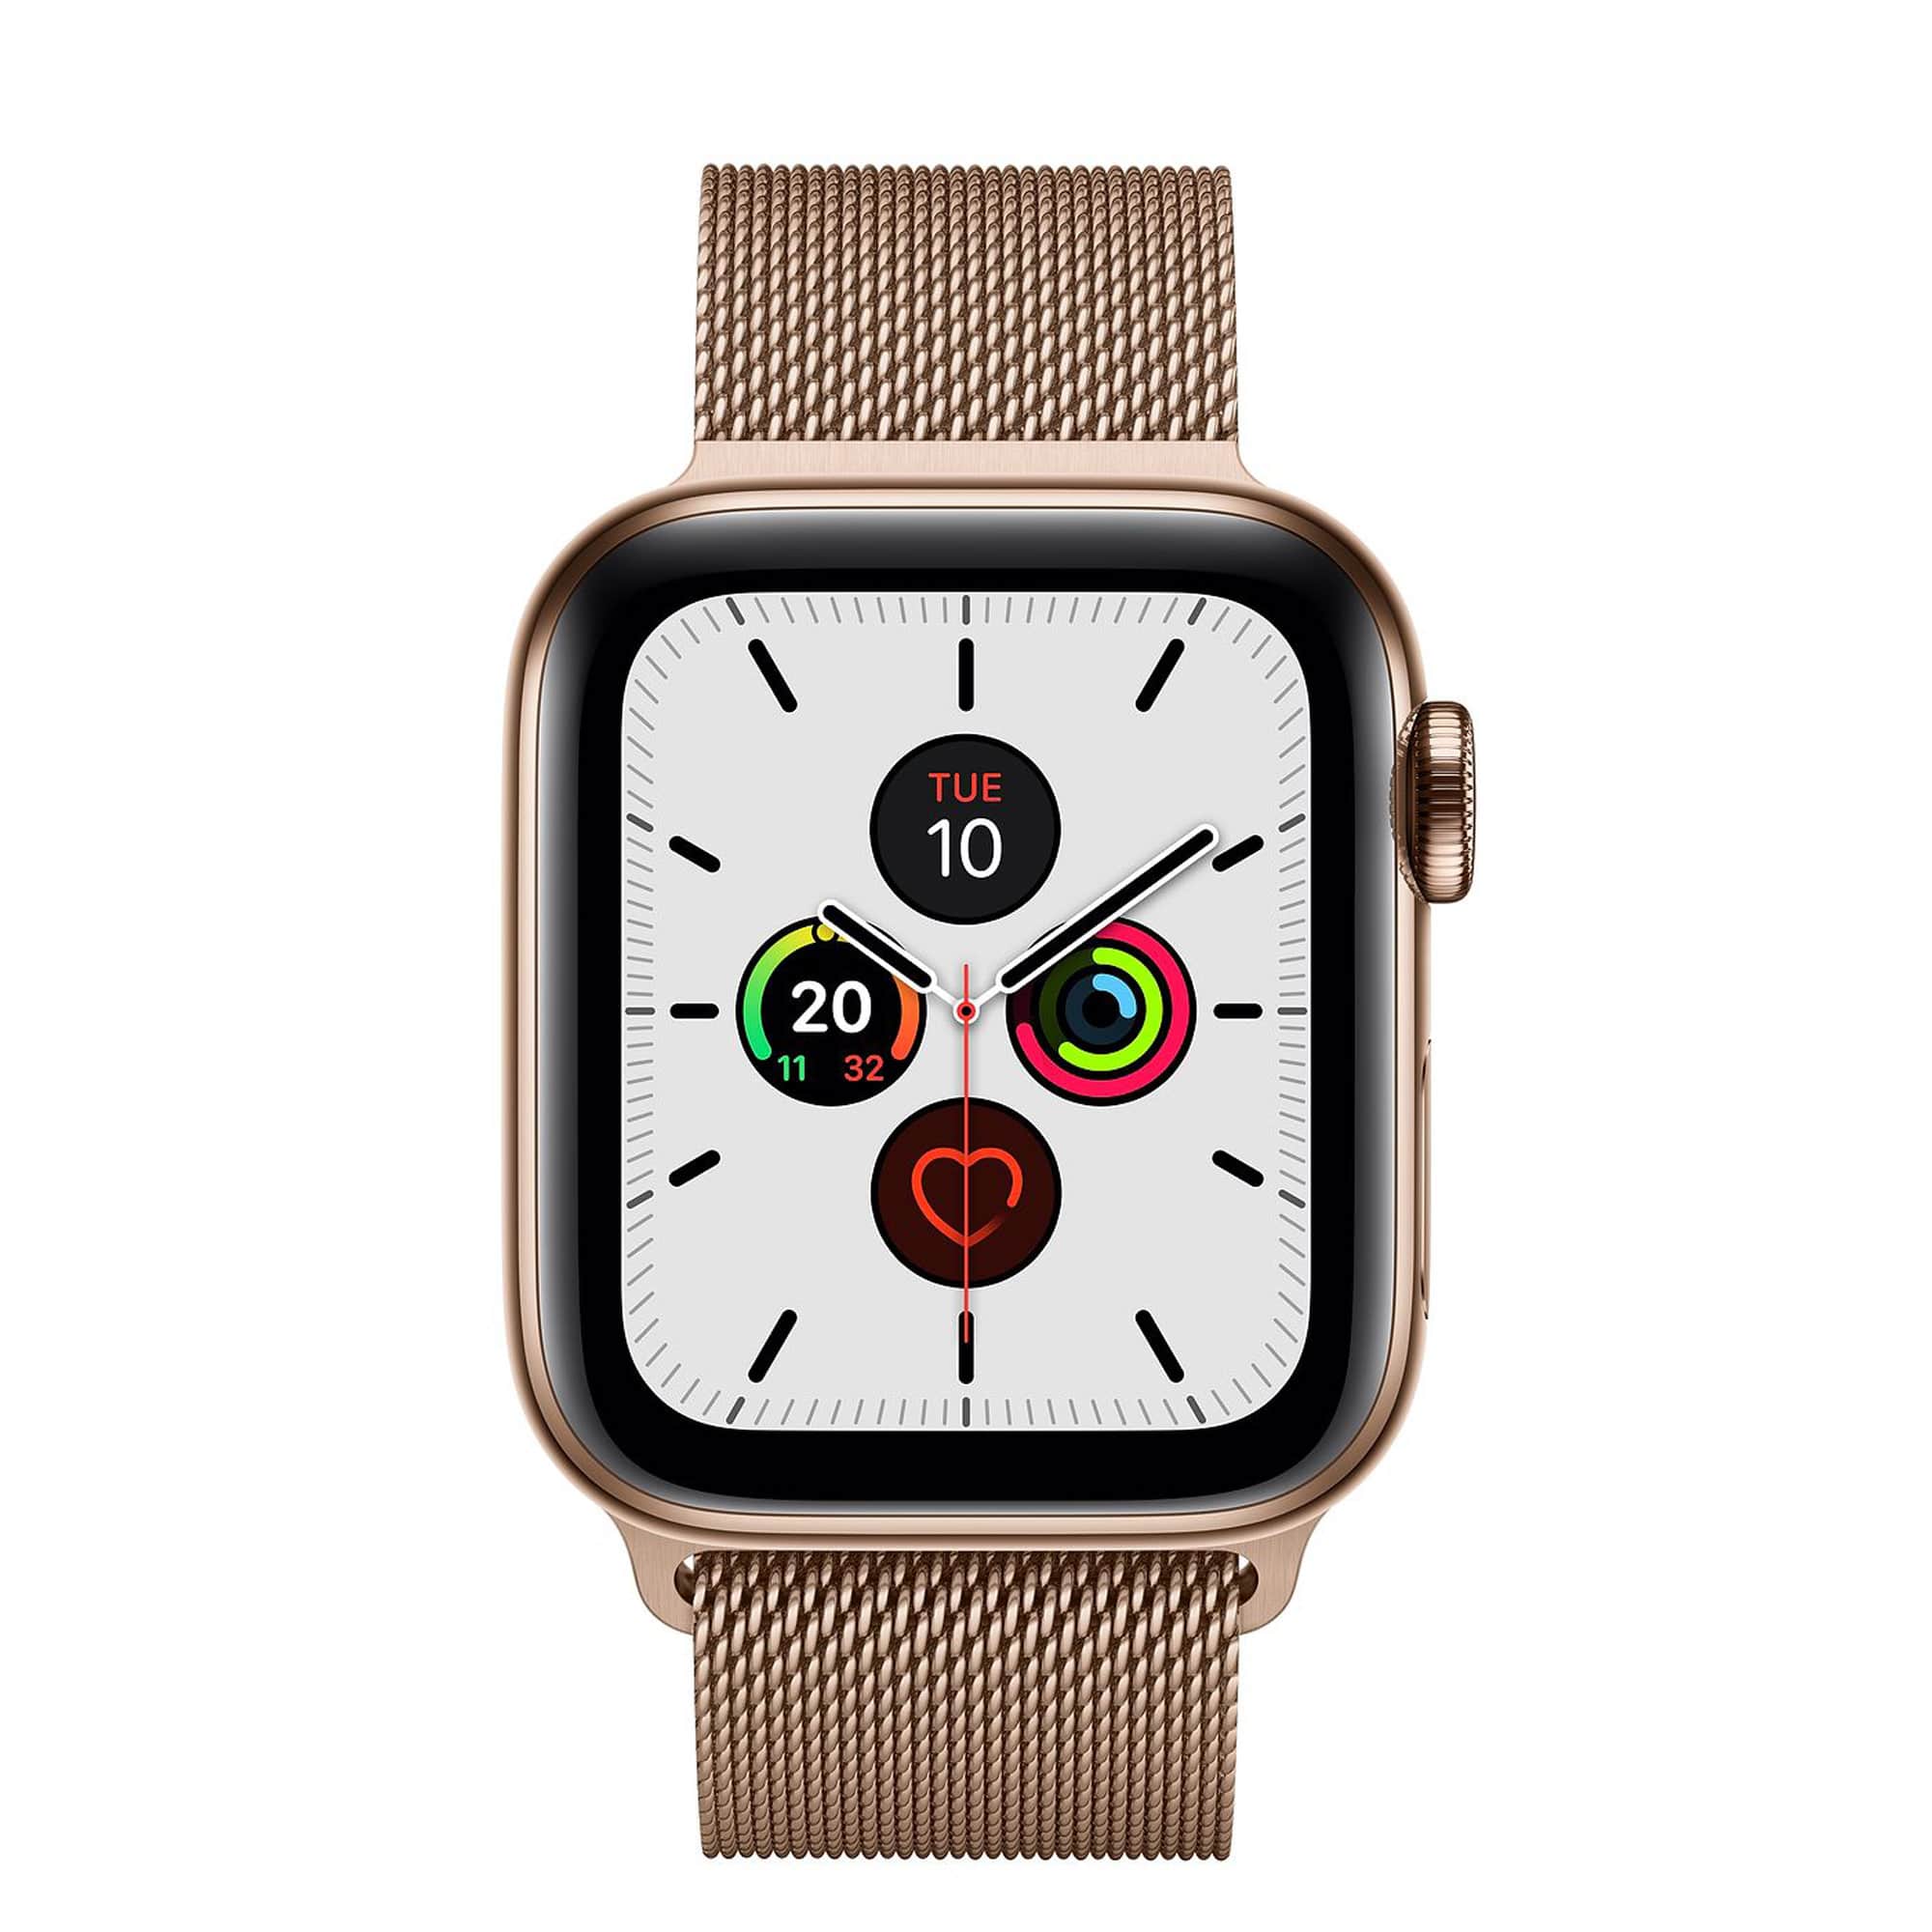 Apple Watch Series 5 Gold Stainless Steel Case with Gold Milanese Loop Apple Watch 5 Stainless Steel Gold